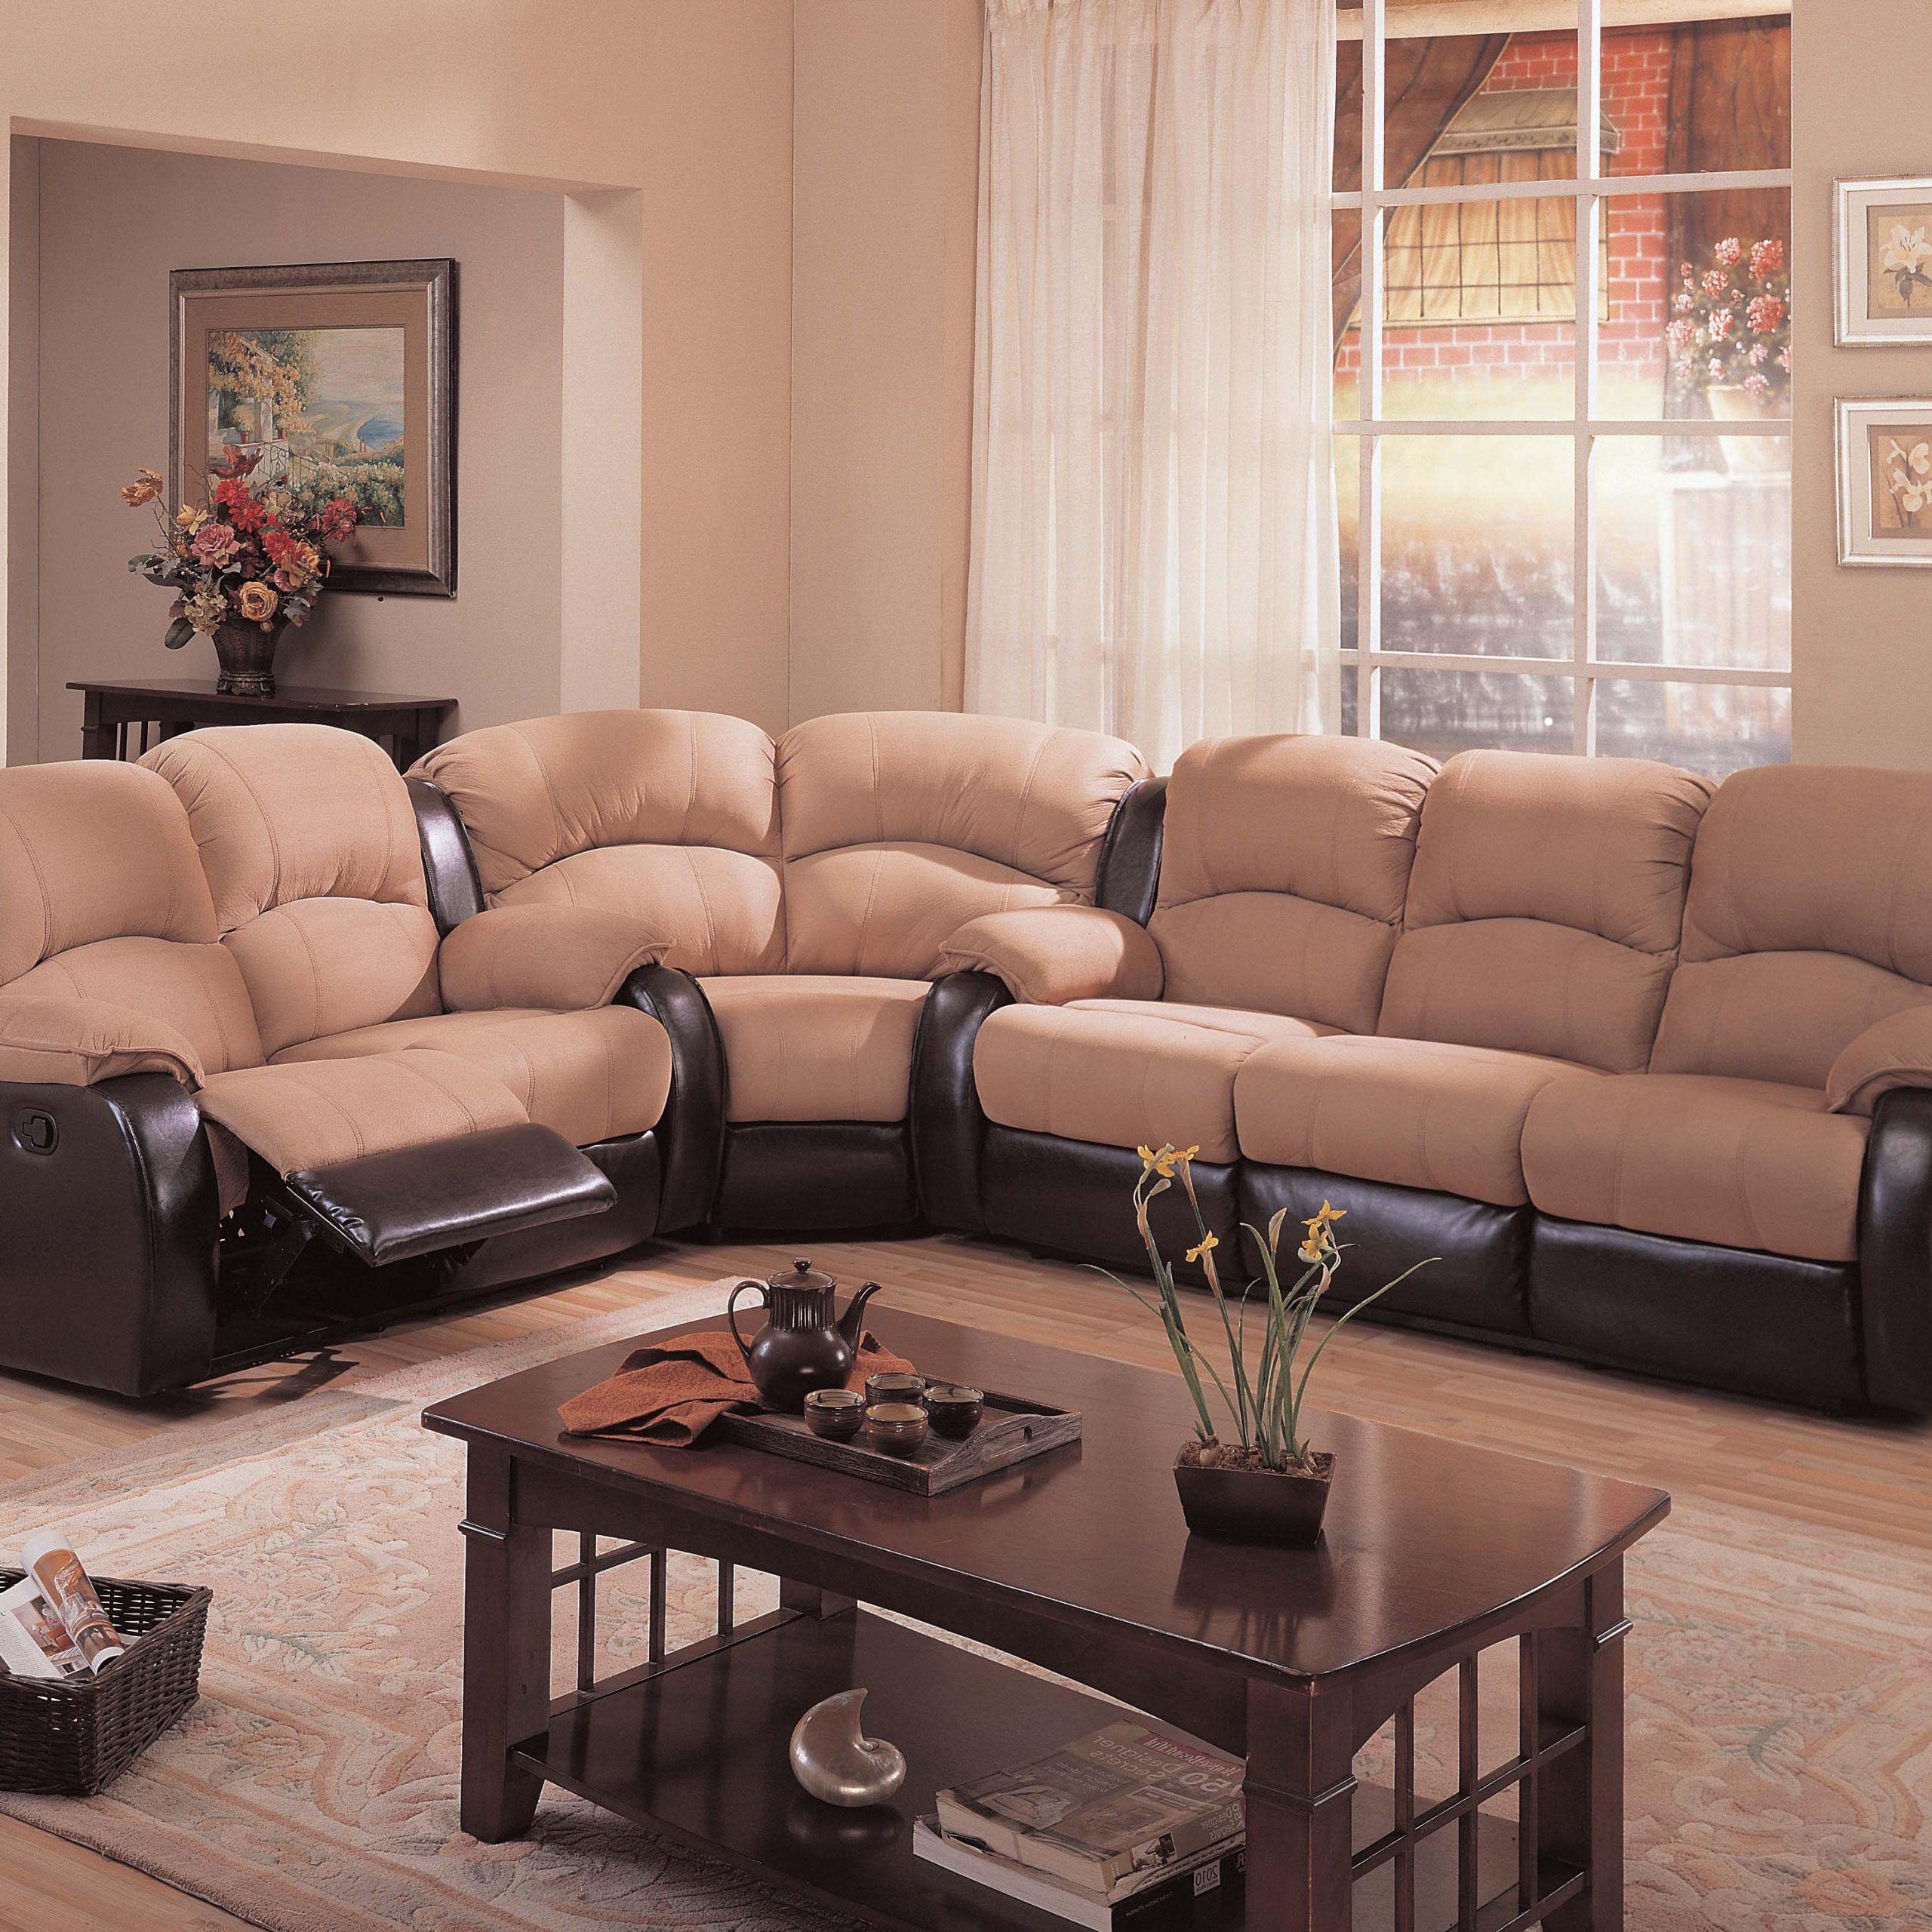 Trendy Microfiber Sectional Couch With Recliner: Chic Features For Your Home With Microfiber Sectional Corner Sofas (View 2 of 15)